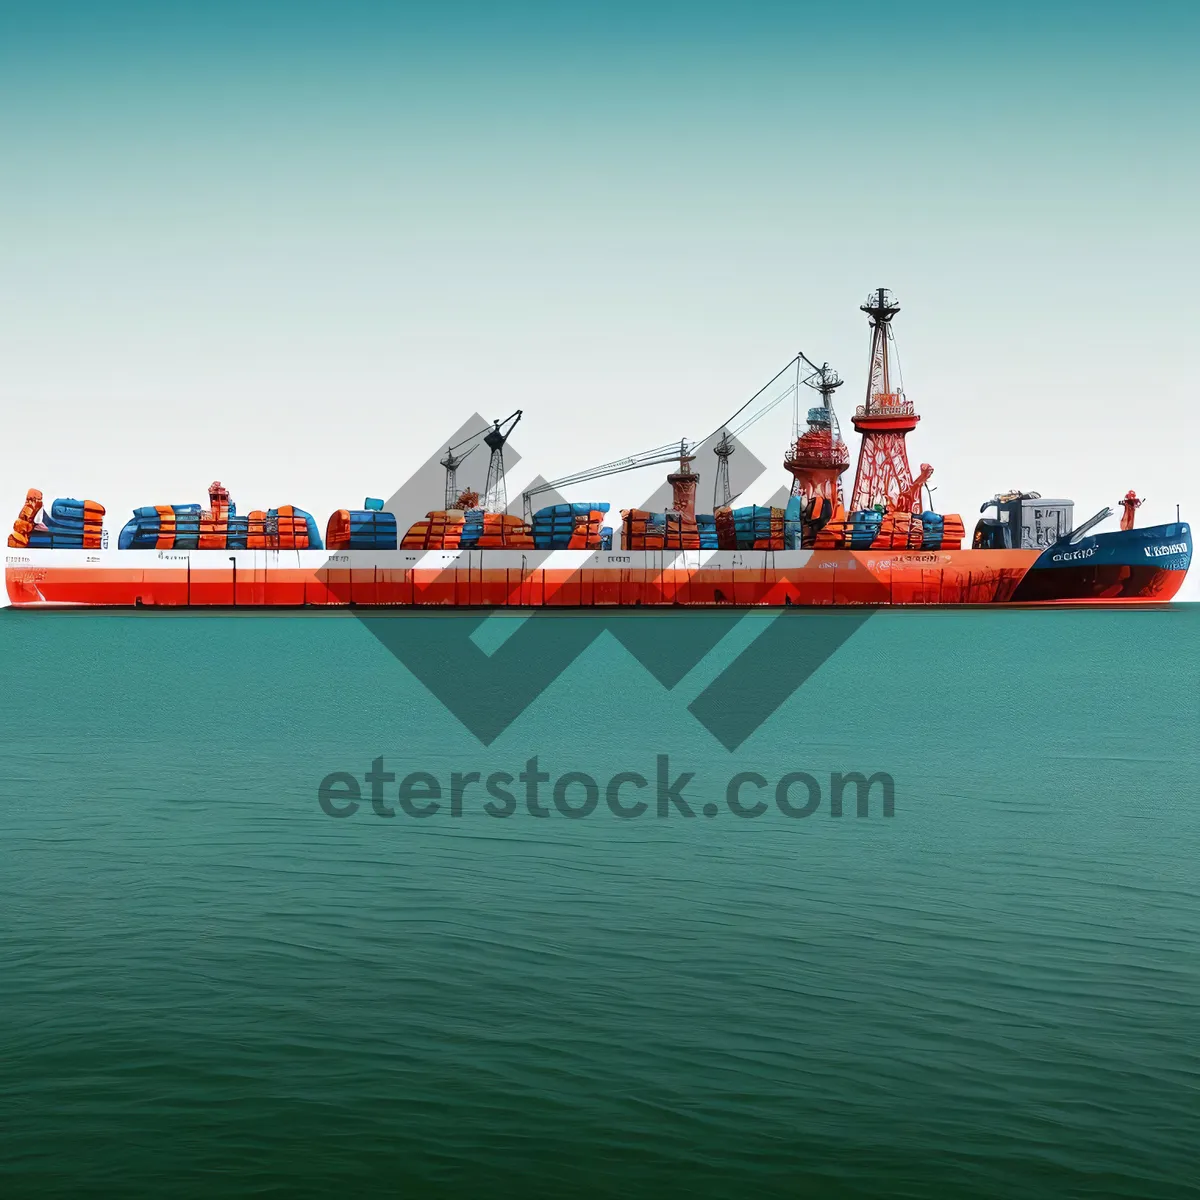 Picture of Maritime Cargo Transport at Harbor with Tugboat